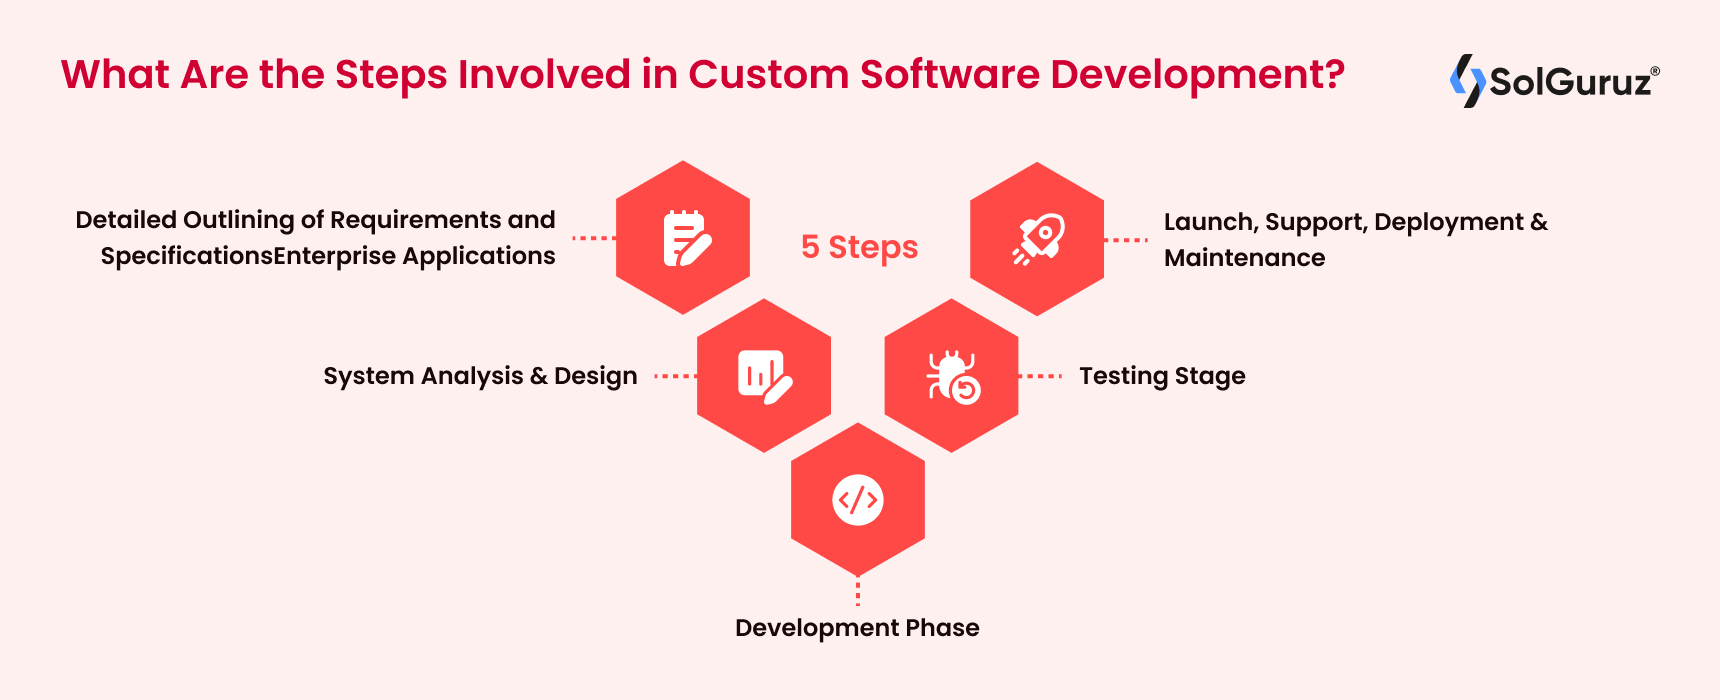 What Are the Steps Involved in Custom Software Development